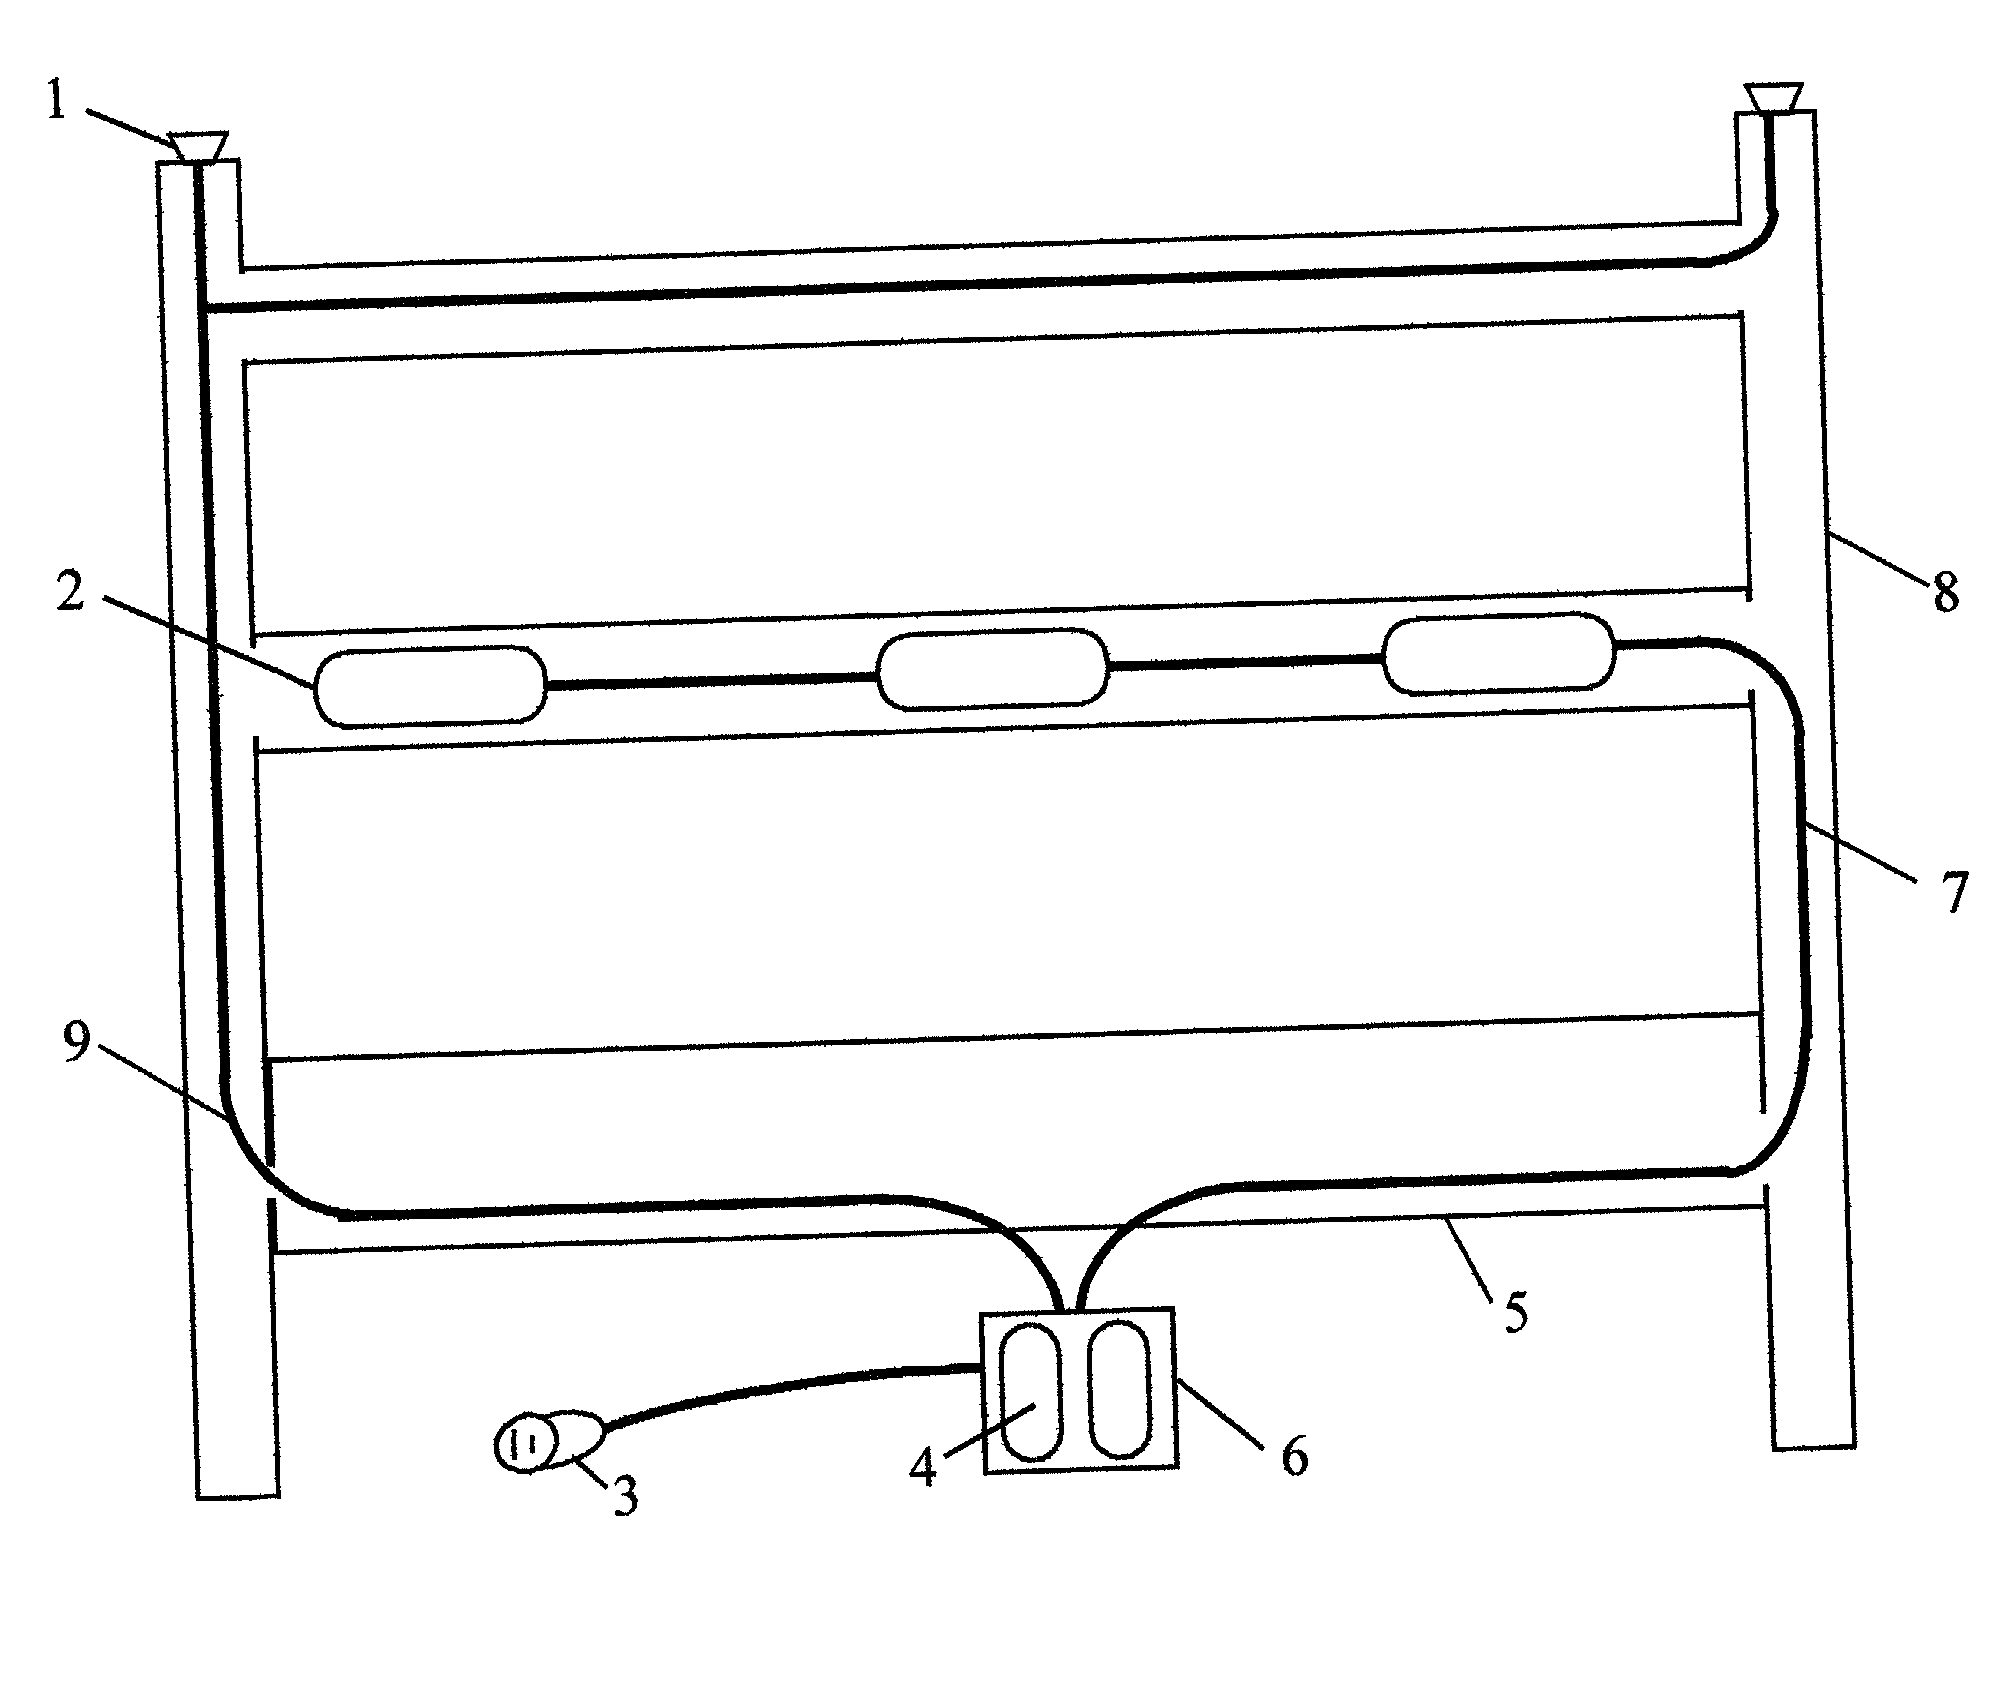 Multifunctional illumination system for furniture, and a bedstead of tubular construction employing this device